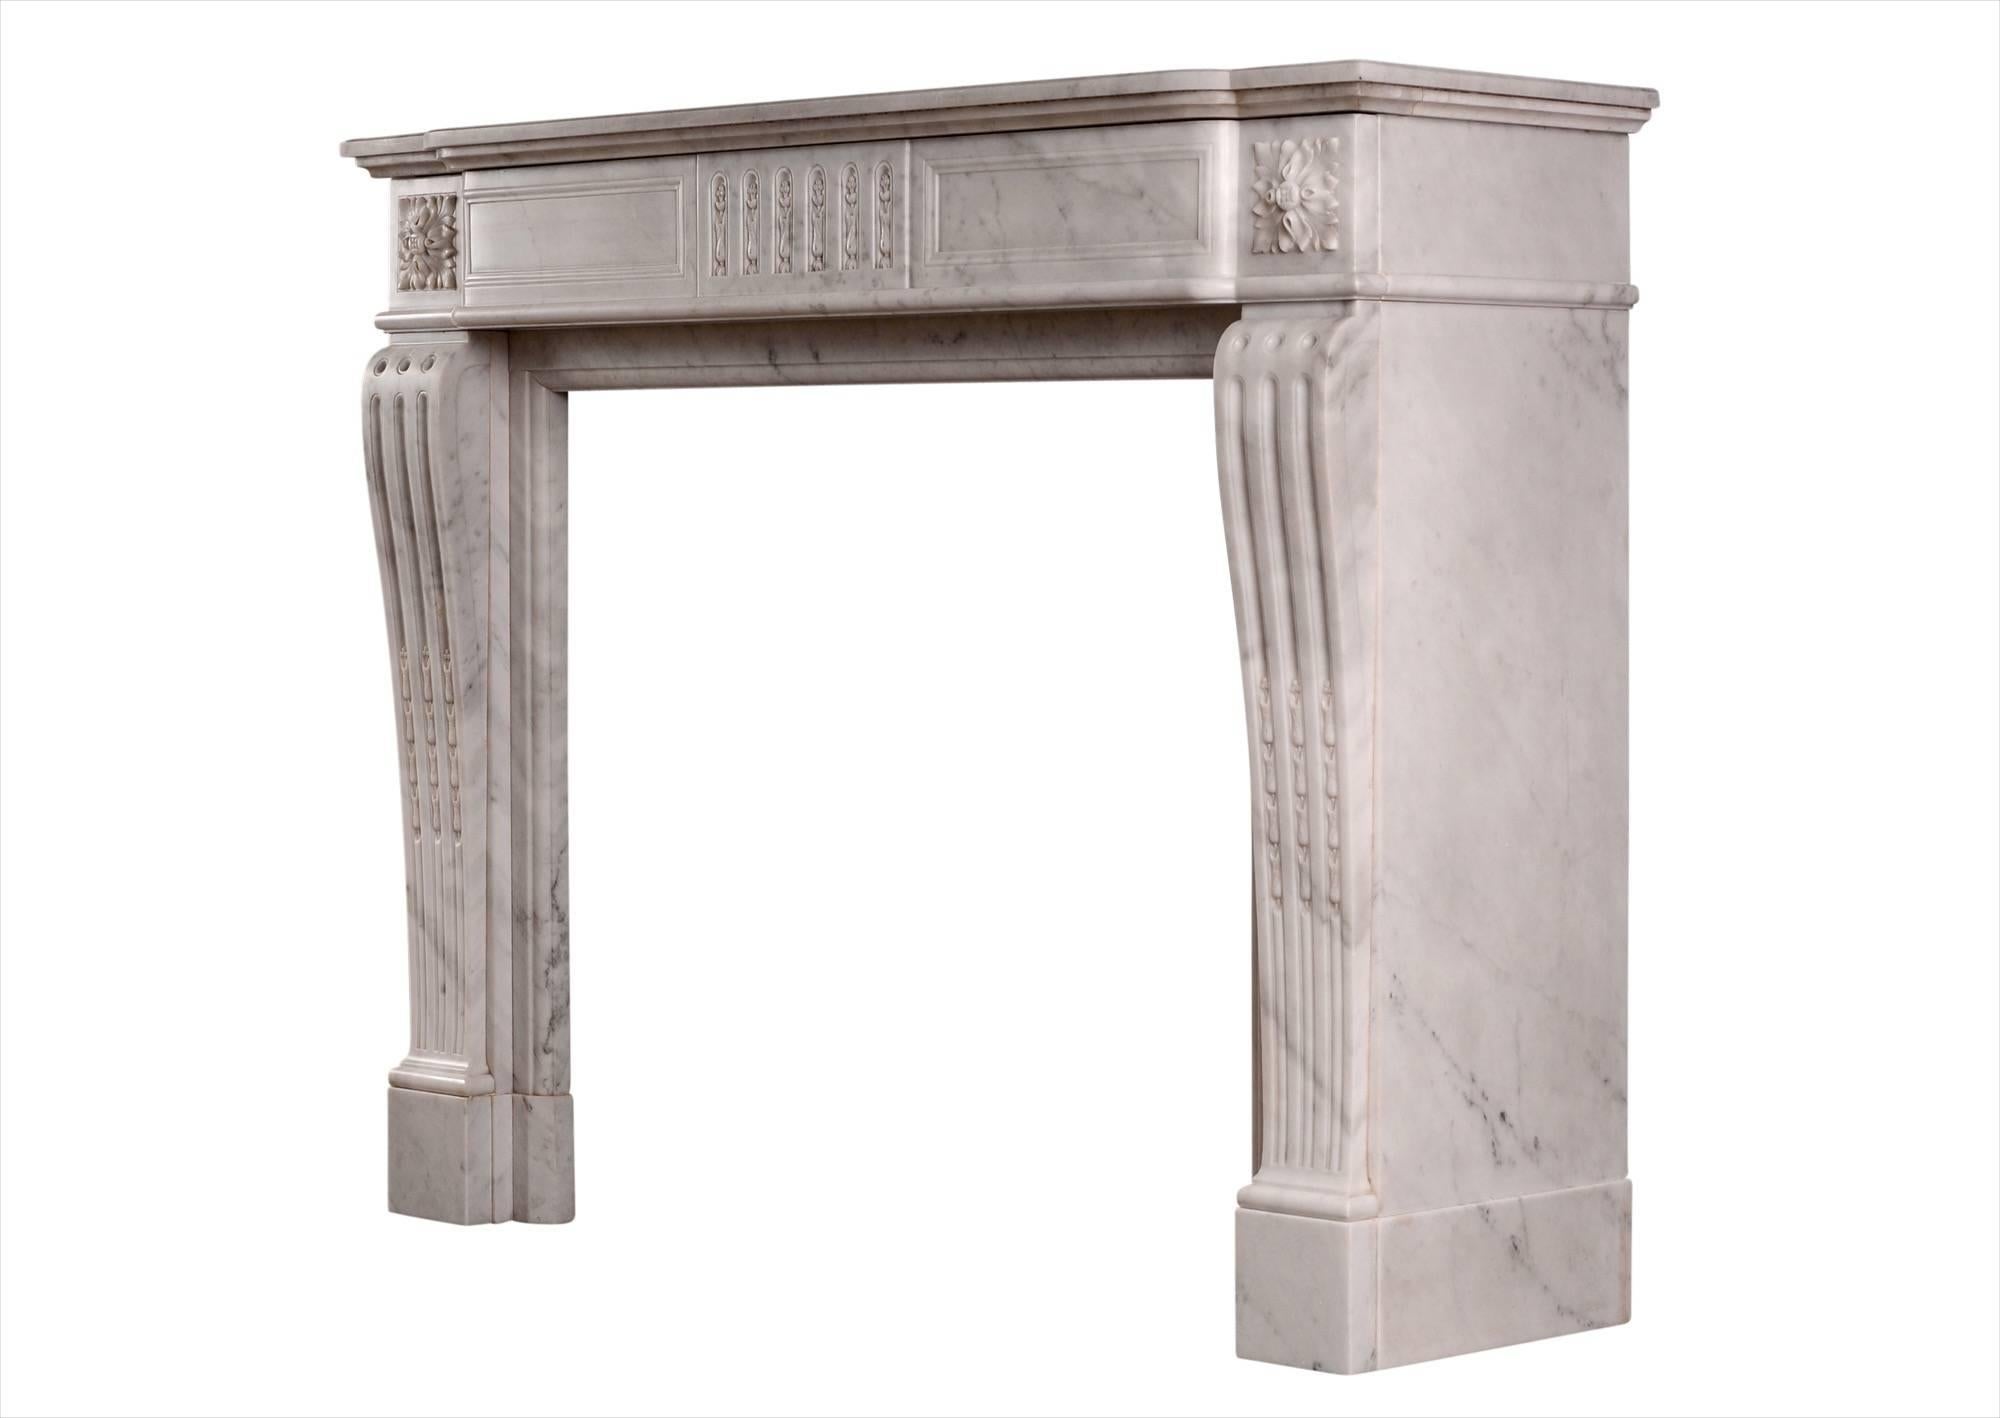 A 19th century French Carrara marble fireplace in the Louis XVI style. The shaped, fluted jambs with carved inlaid husks, surmounted by carved square paterae. The panelled frieze with matching inlaid flutes. Bowfronted moulded shelf.

Measures: